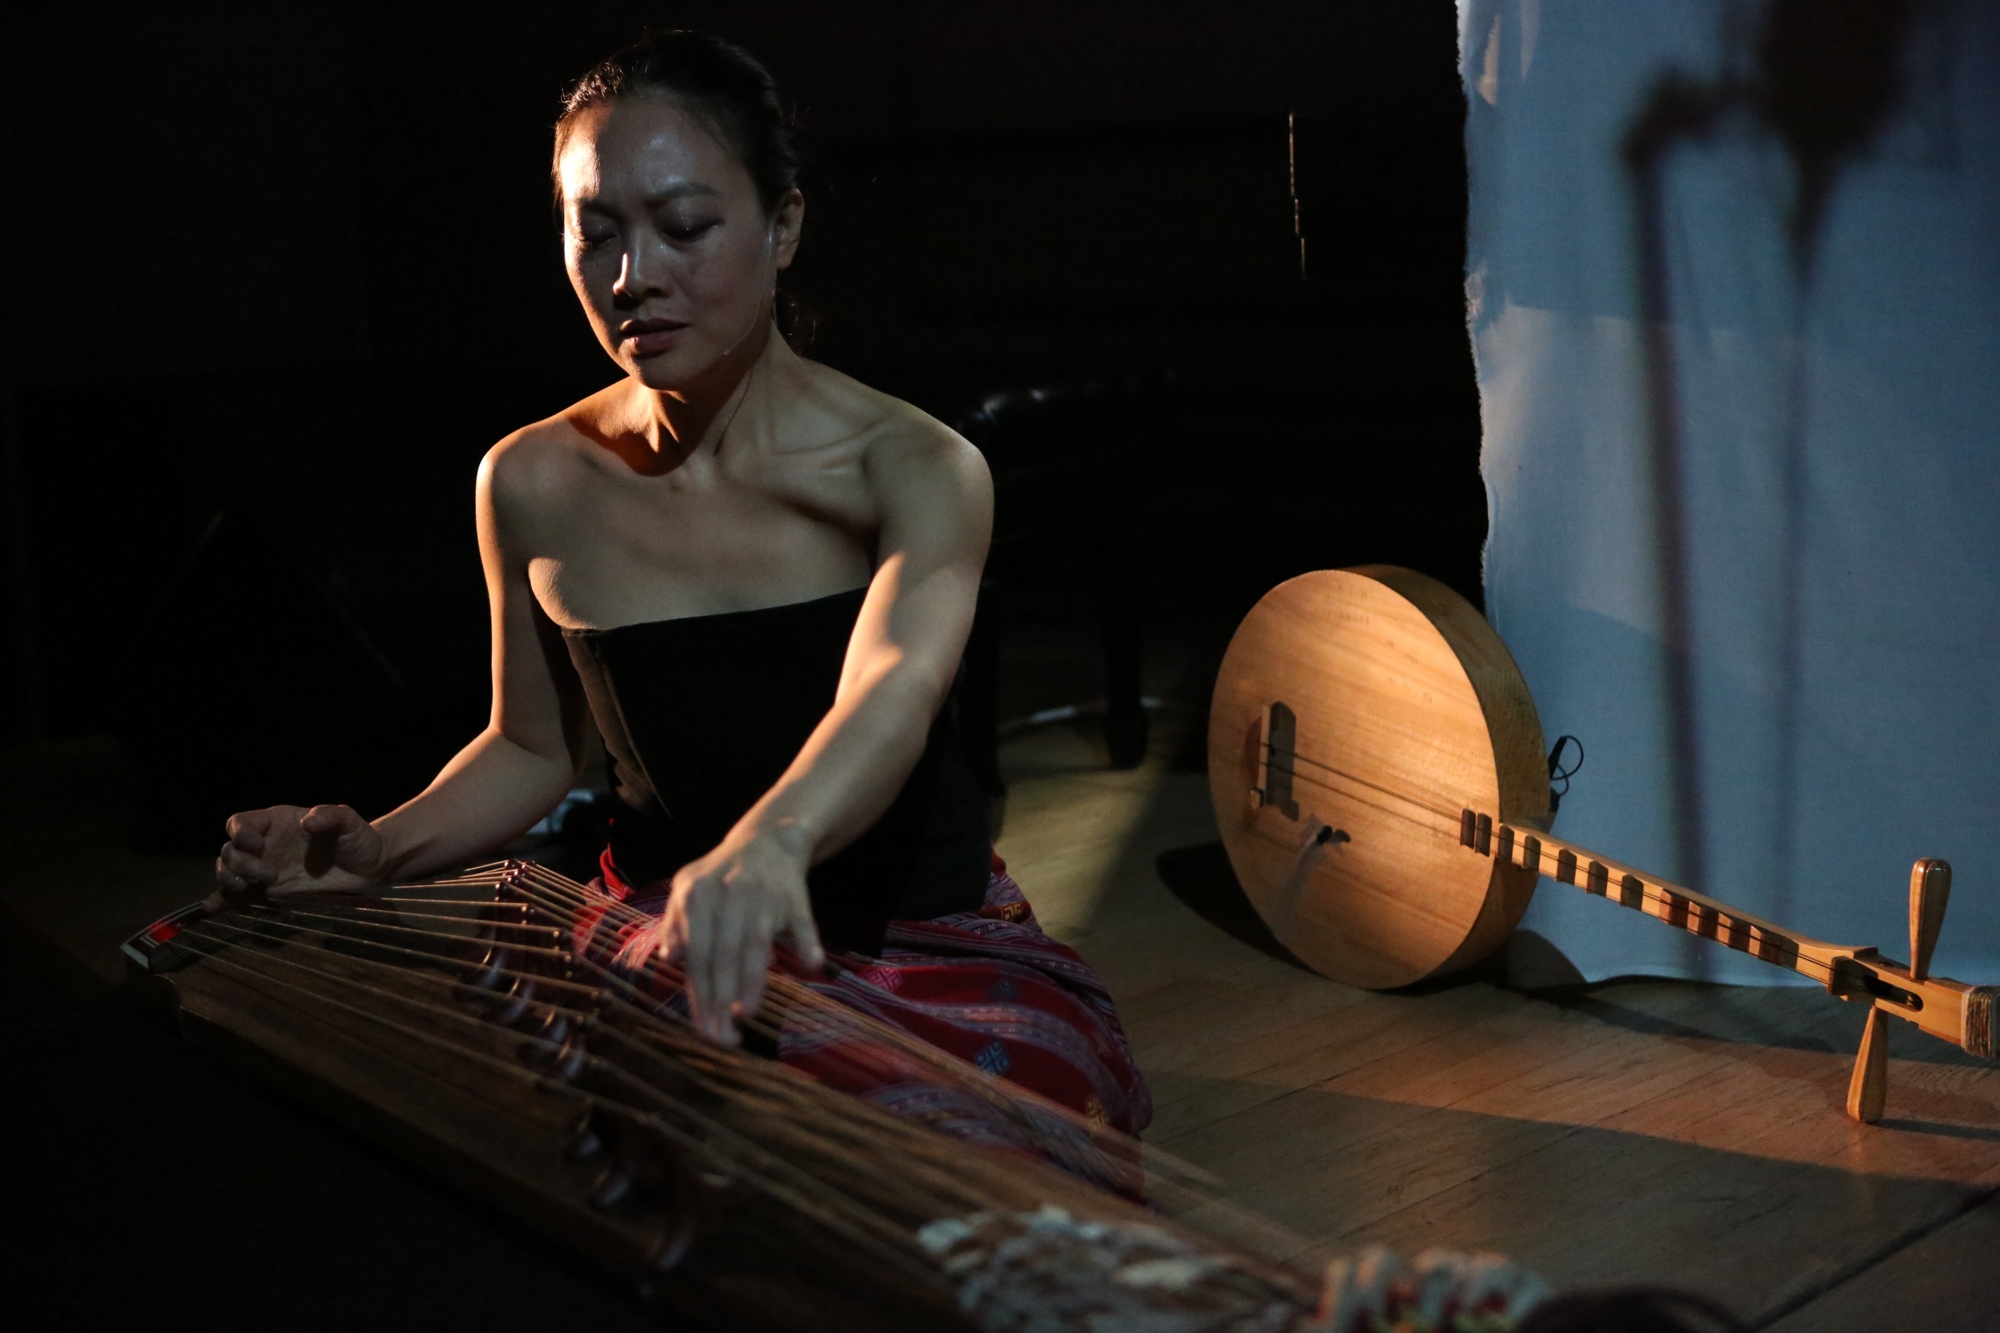 Jen Shyu is a past performer at The Hermitage Artist Retreat. (Photo by Steven Schreiber)